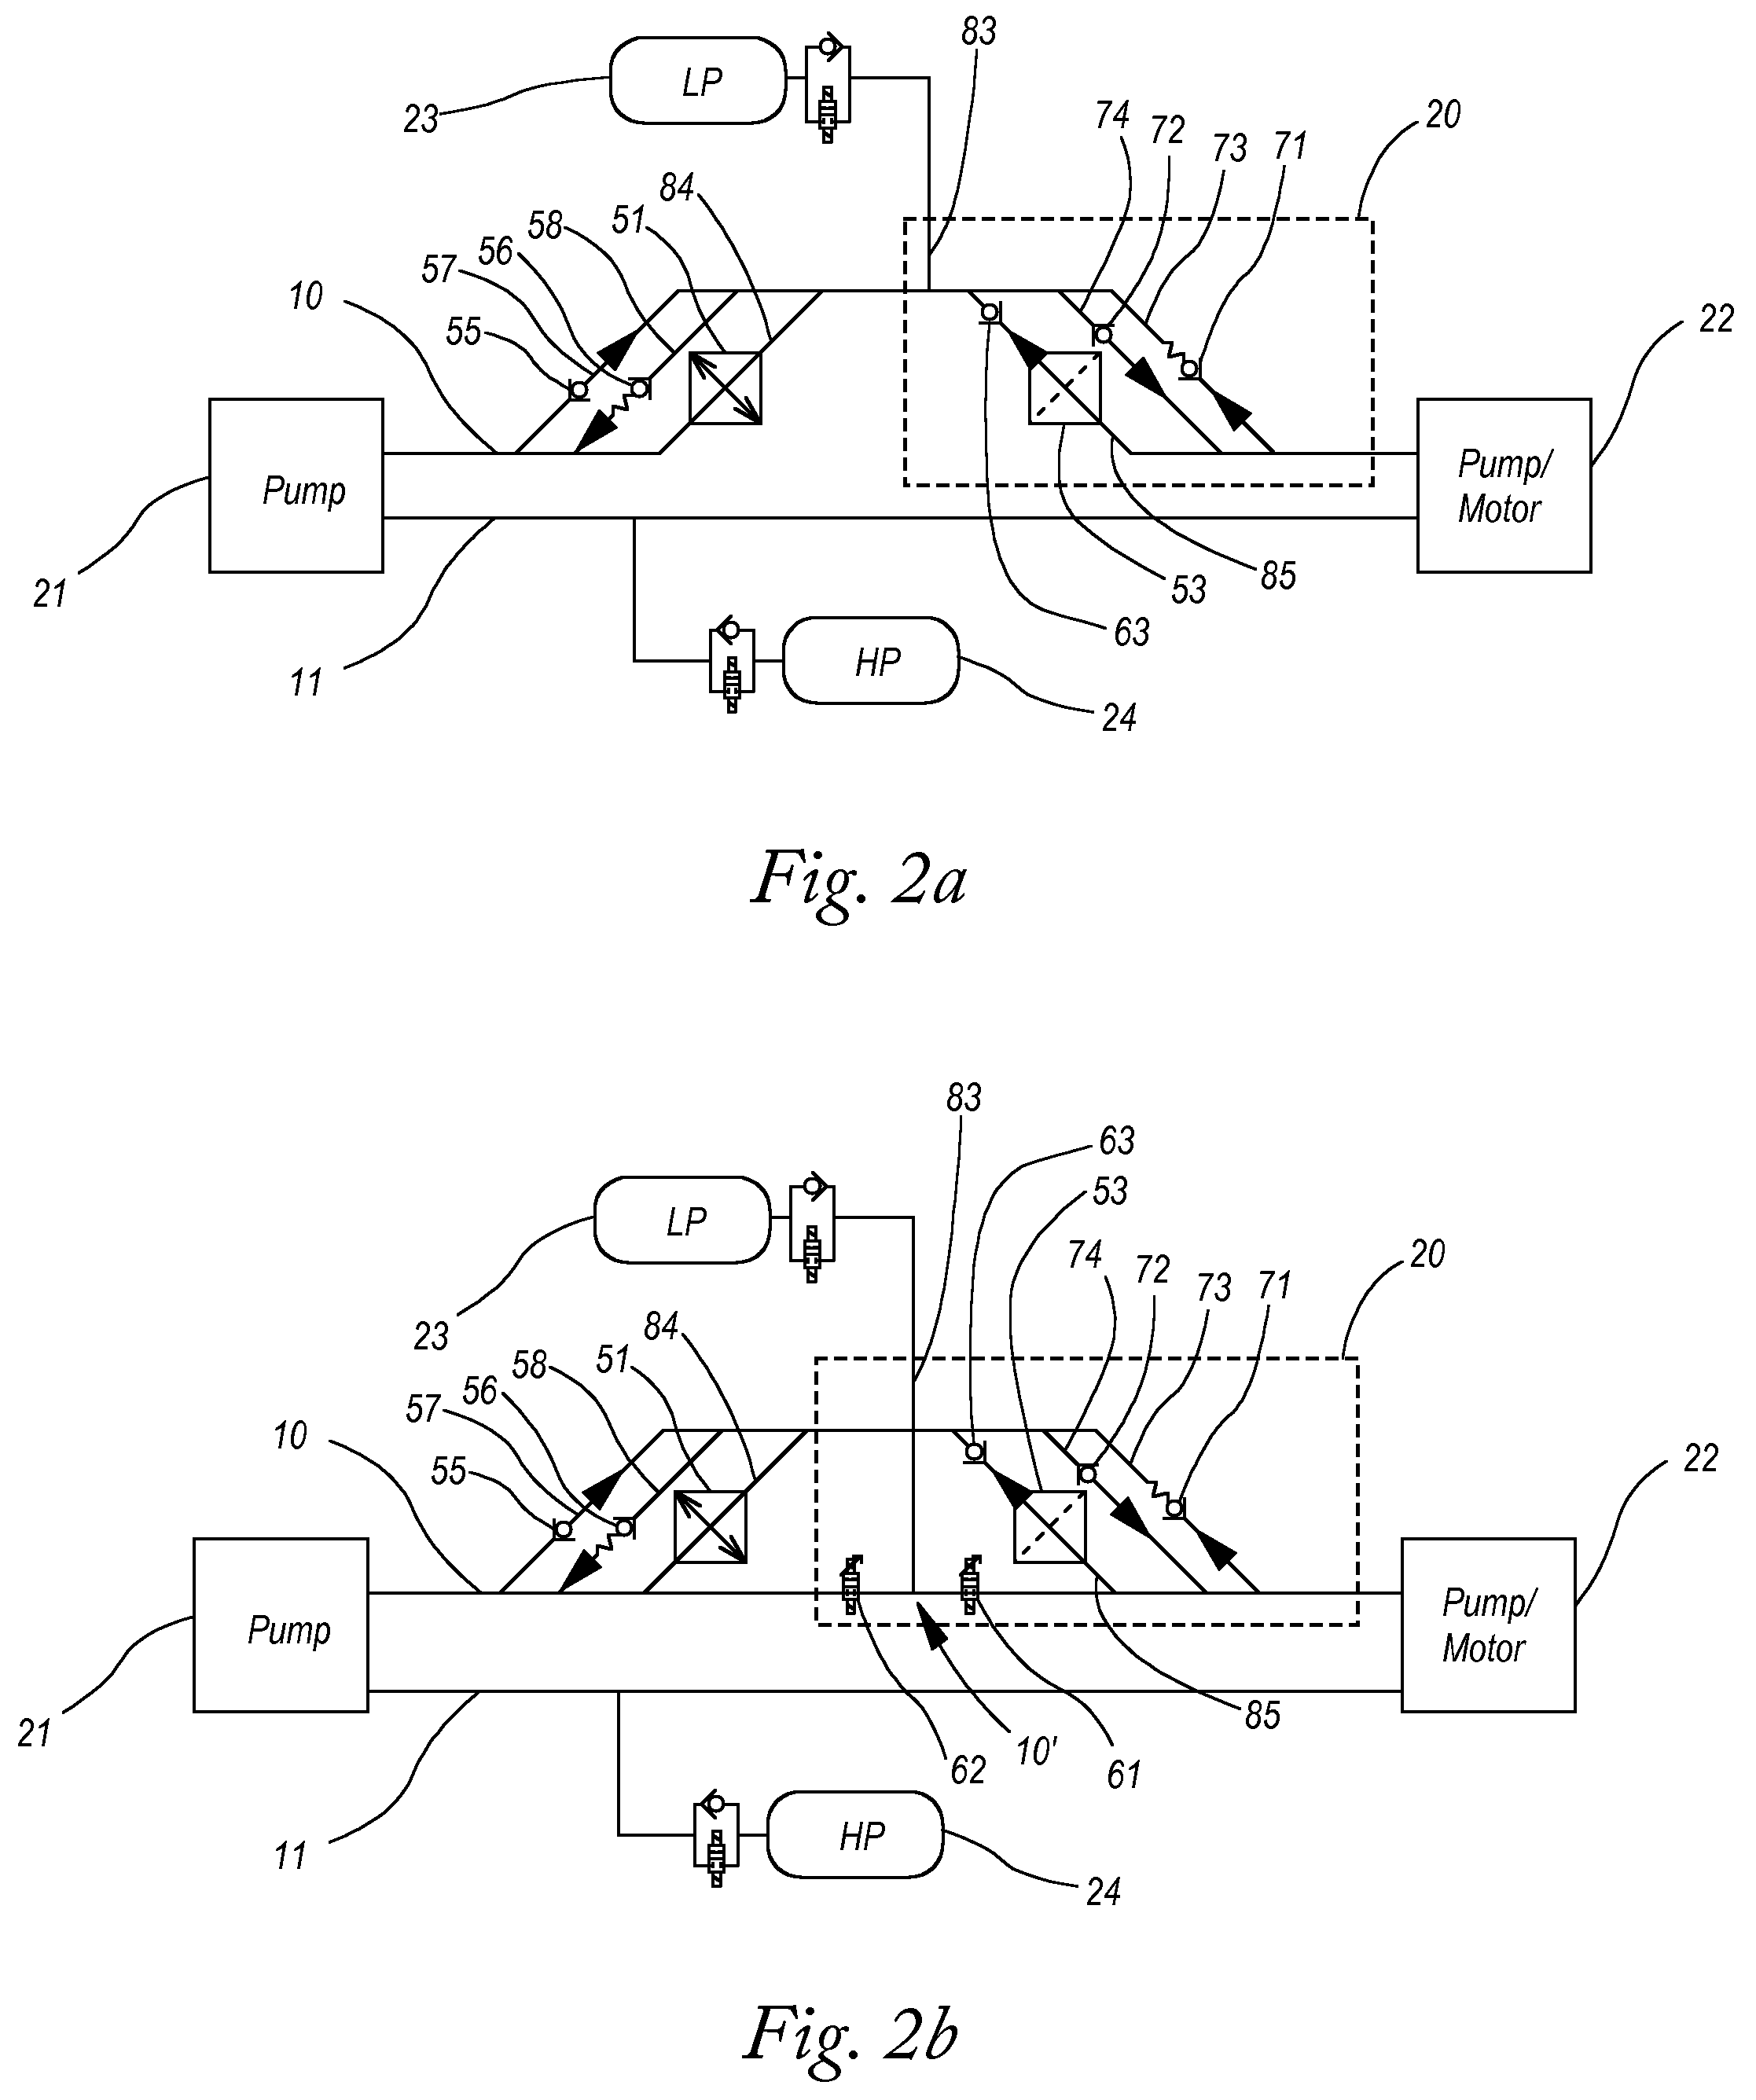 Hydraulic Circuit and Manifold with Multifunction Valve